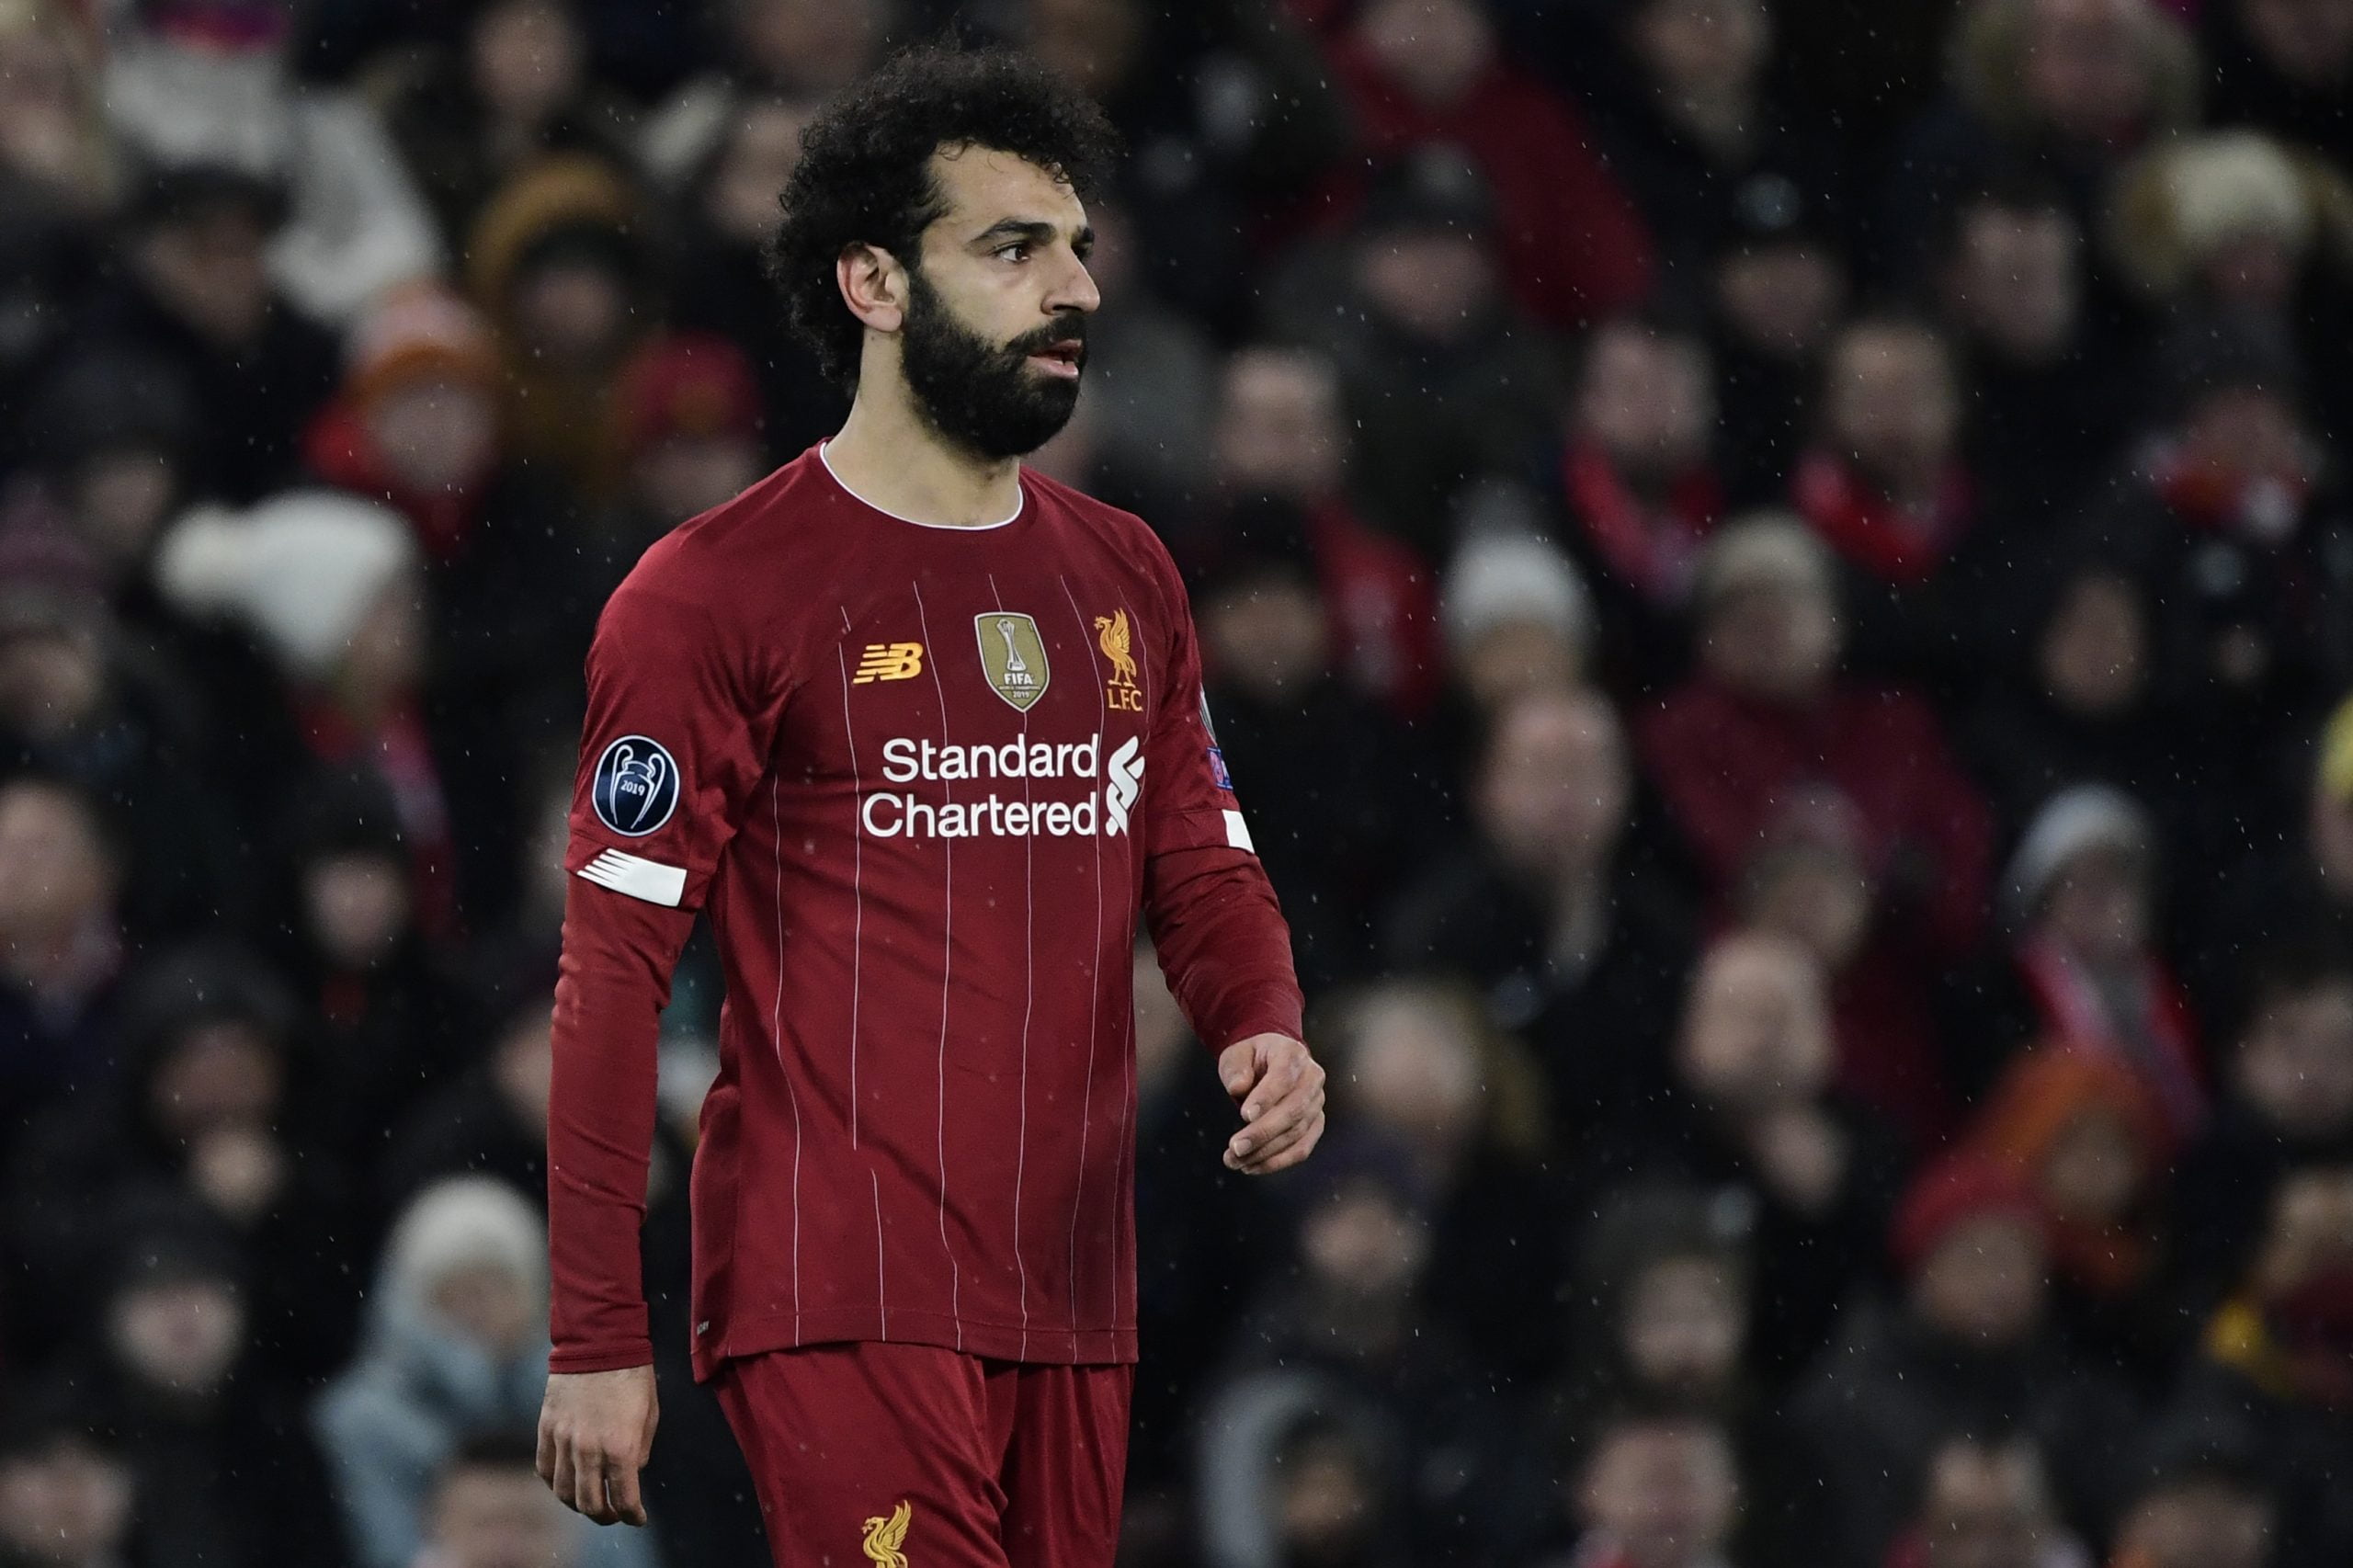 Liverpool's Egyptian midfielder Mohamed Salah looks on during the UEFA Champions league Round of 16 second leg football match between Liverpool and Atletico Madrid at Anfield in Liverpool, north west England on March 11, 2020. (Photo by JAVIER SORIANO / AFP) (Photo by JAVIER SORIANO/AFP via Getty Images)